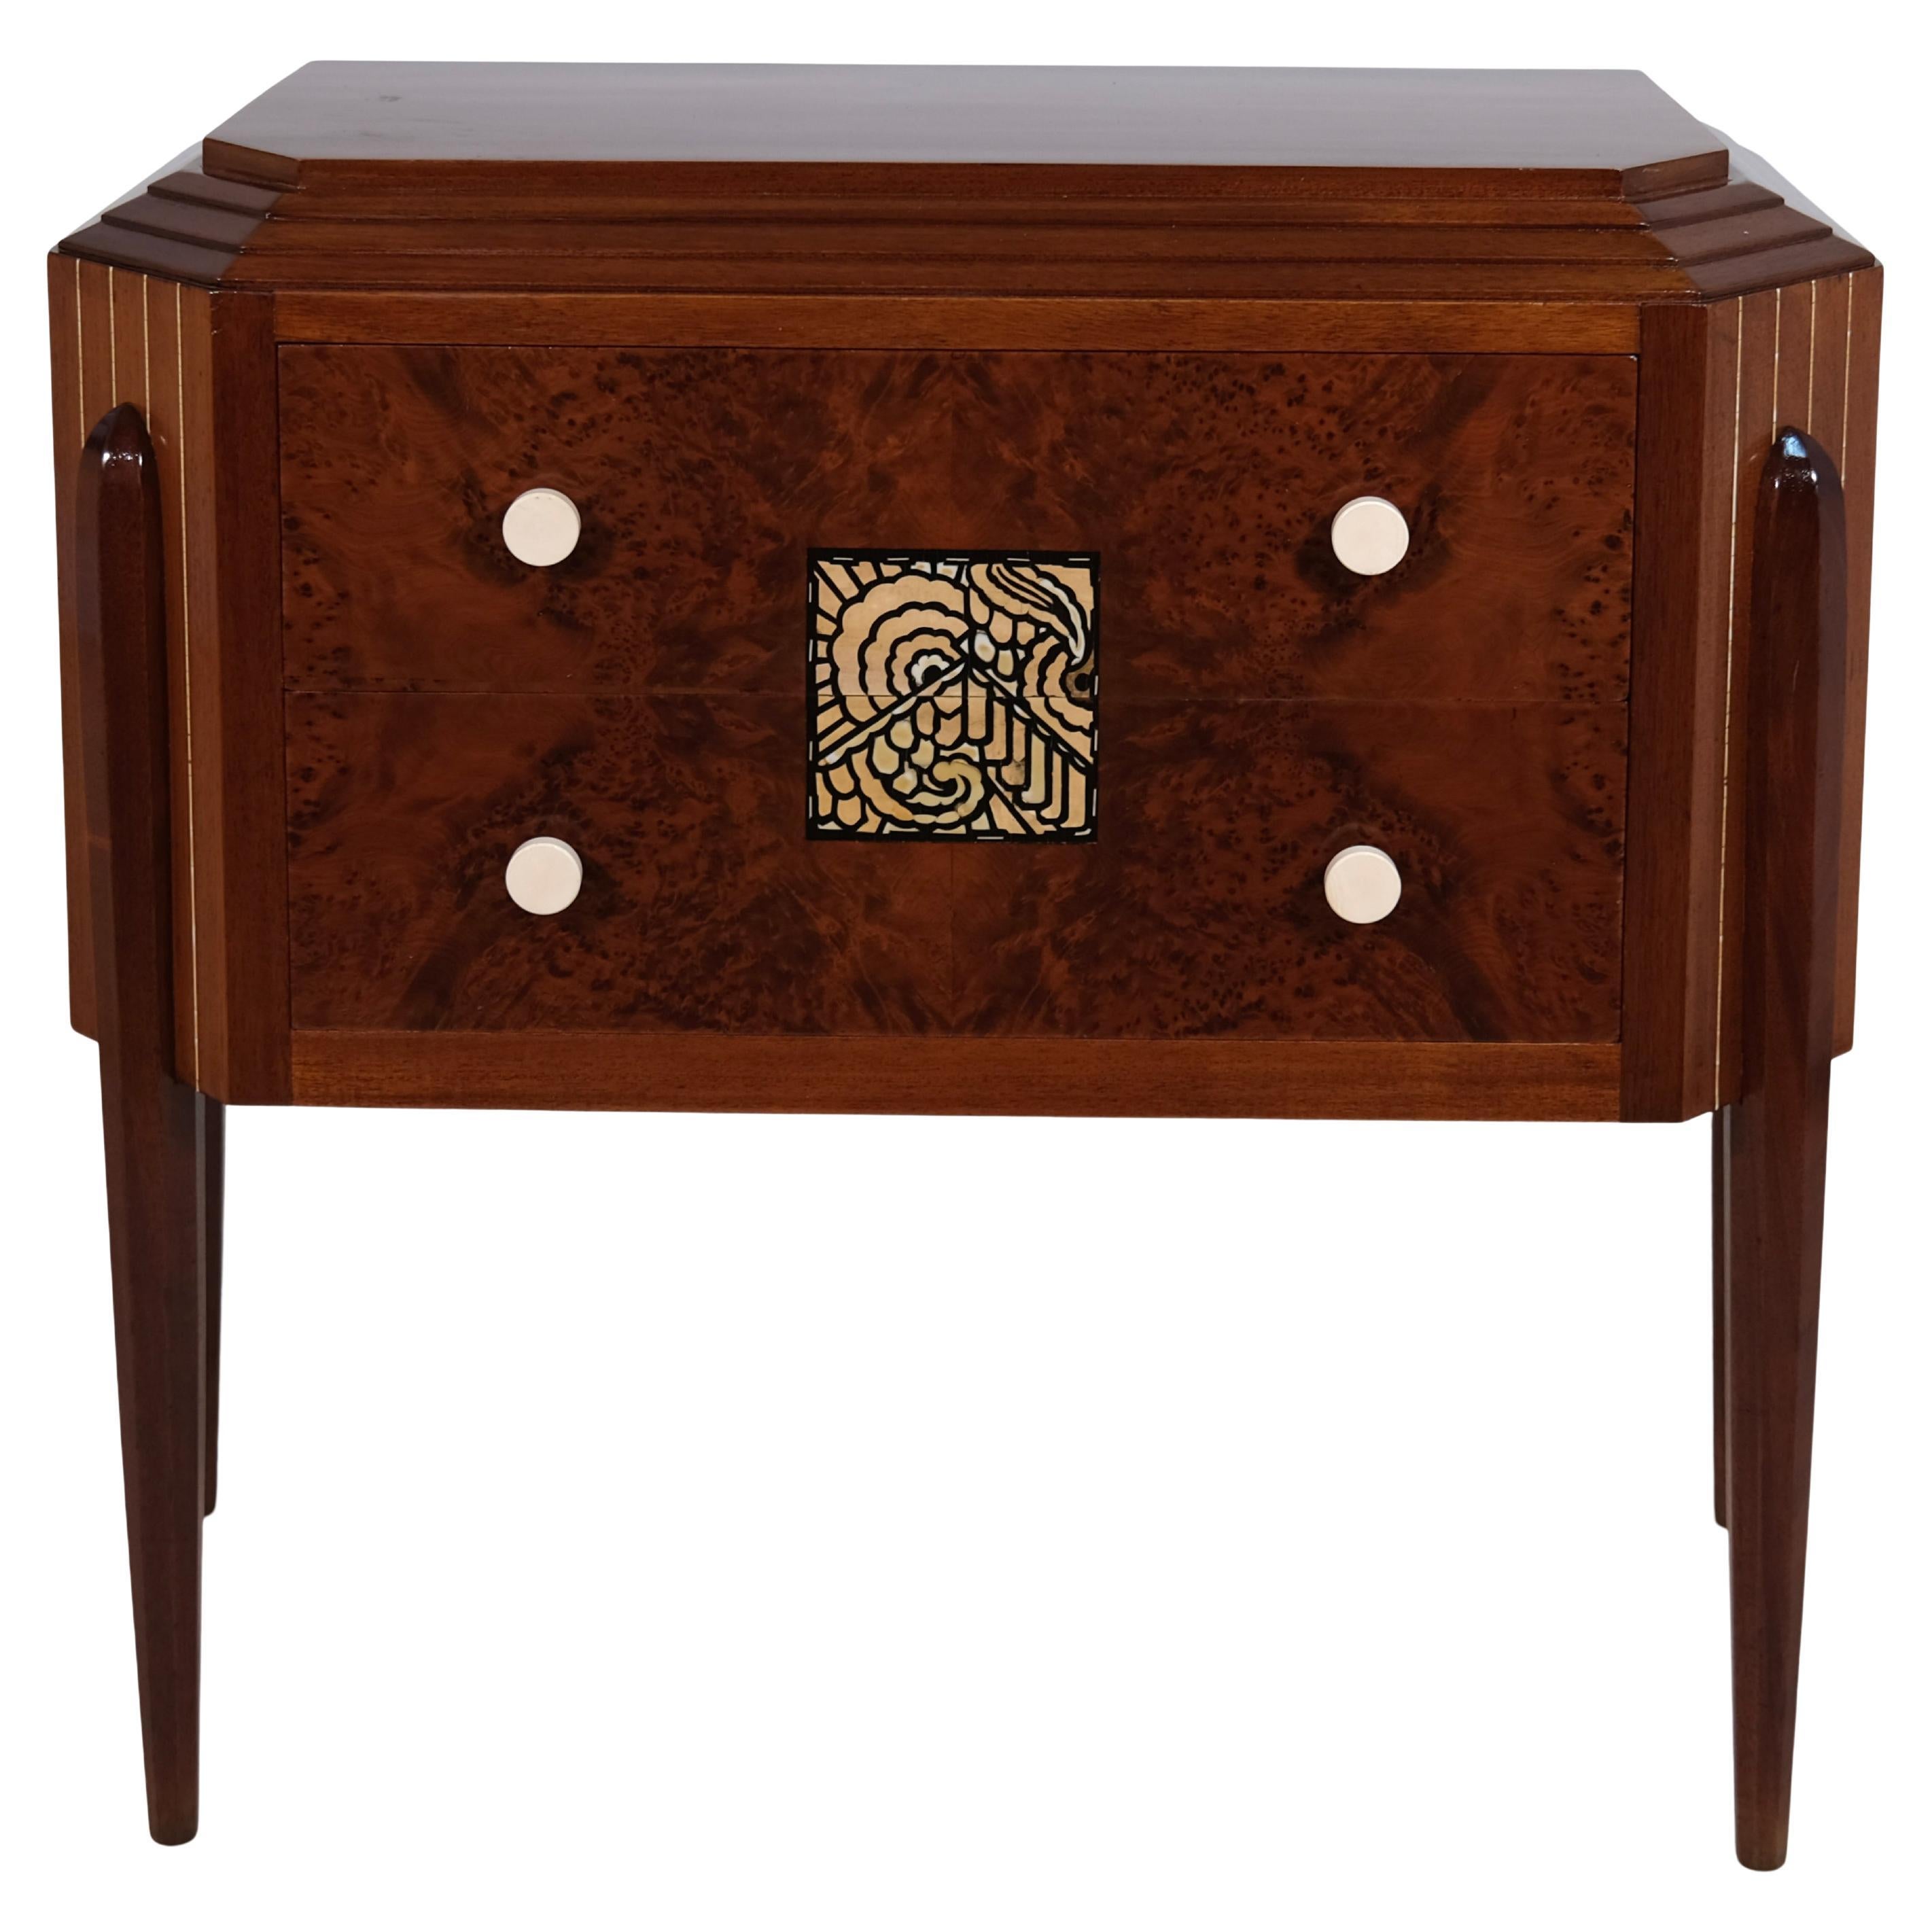 French Art Deco Chest Of Drawers in Mahogany and Thuja with Floral Inlays